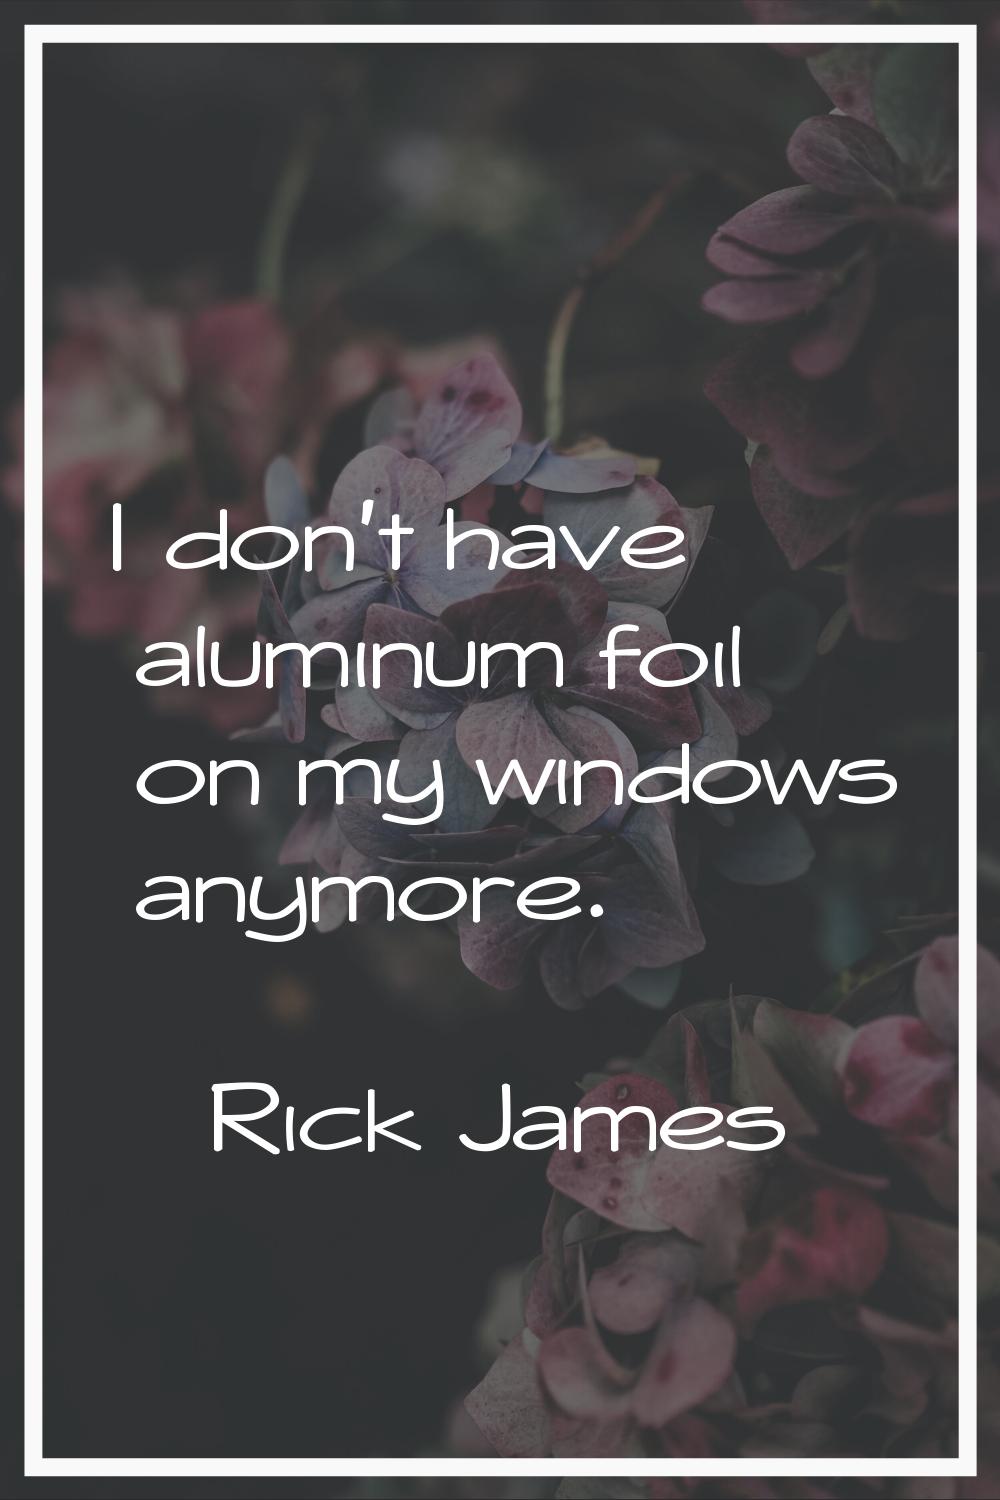 I don't have aluminum foil on my windows anymore.